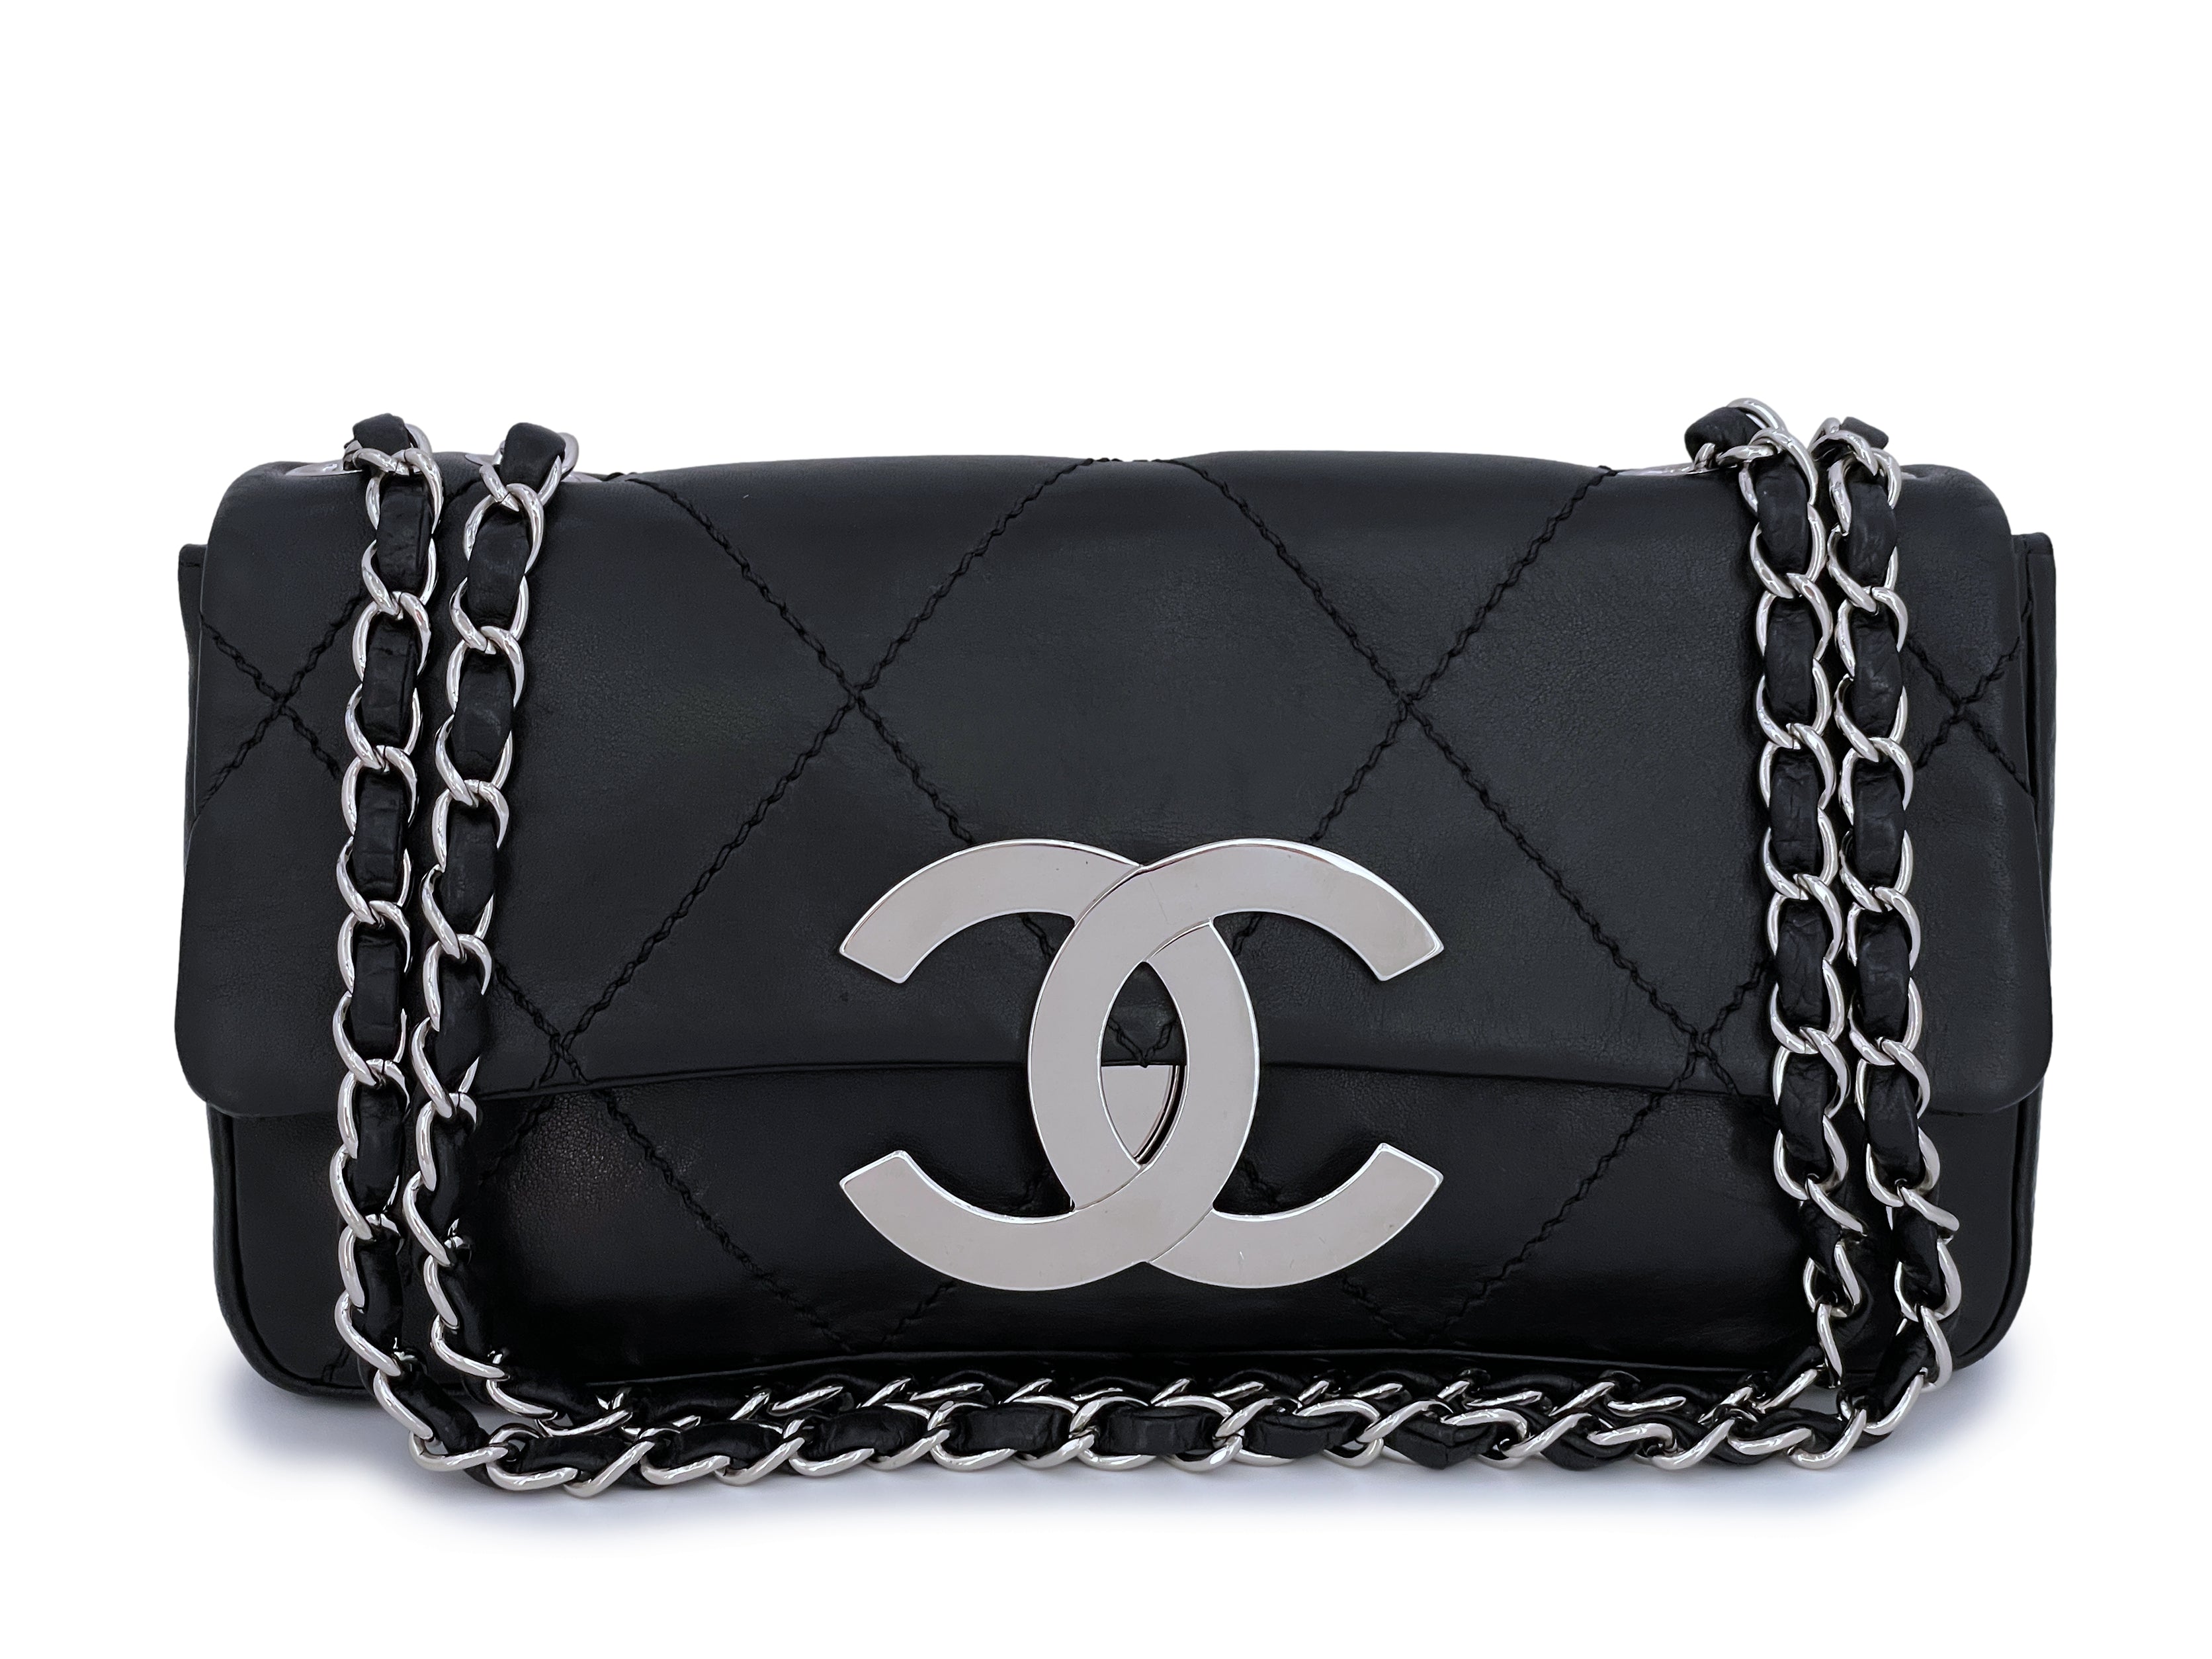 Price check on Chanel bag from 2005? : r/chanel